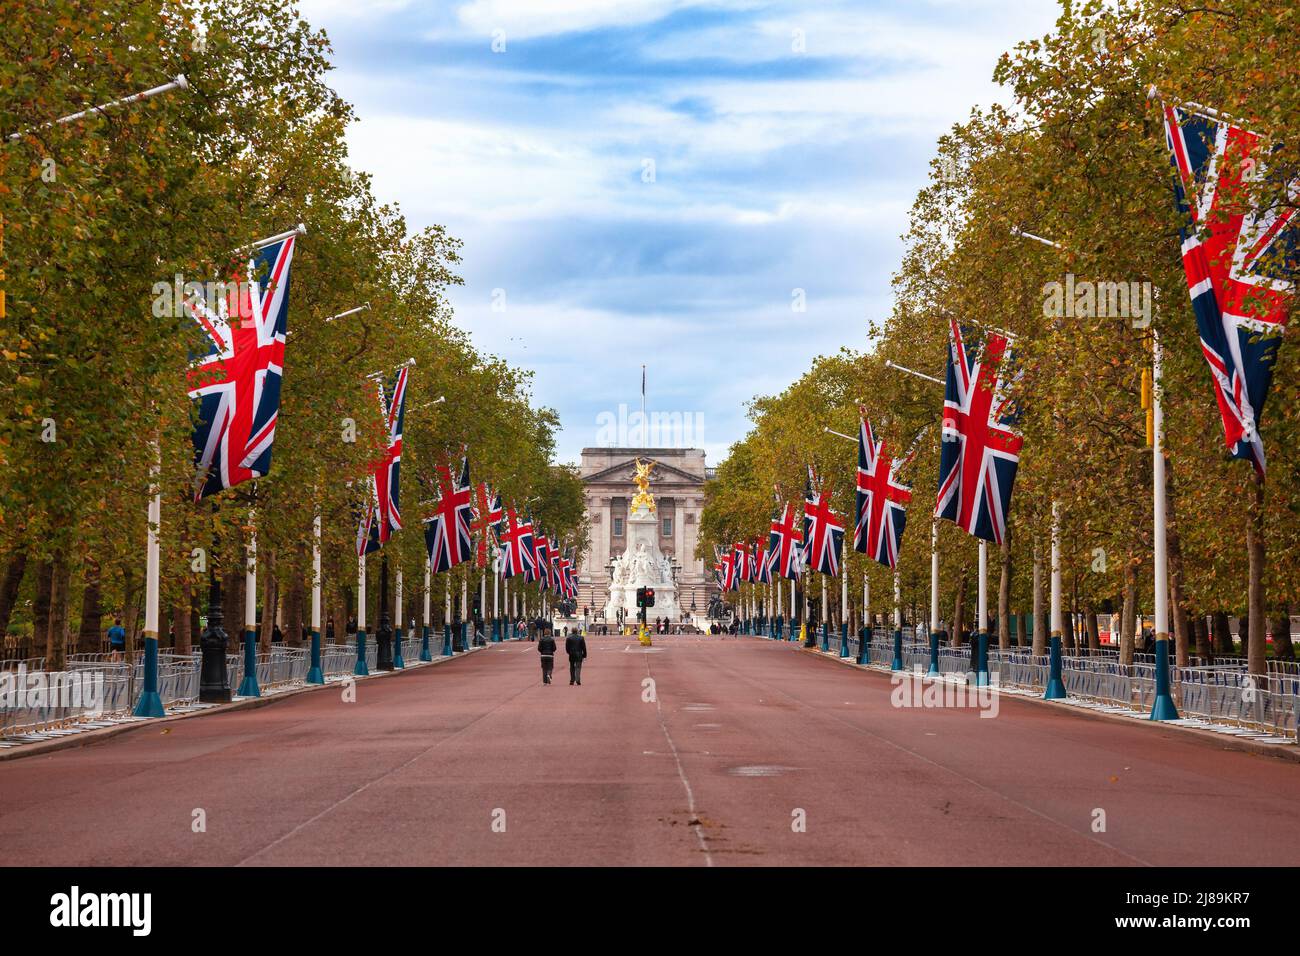 LONDON, UK - OCTOBER 28, 2012: A view along the Mall, the landmark ceremonial approach road to Buckingham Palace decorated with Union Jack flags Stock Photo